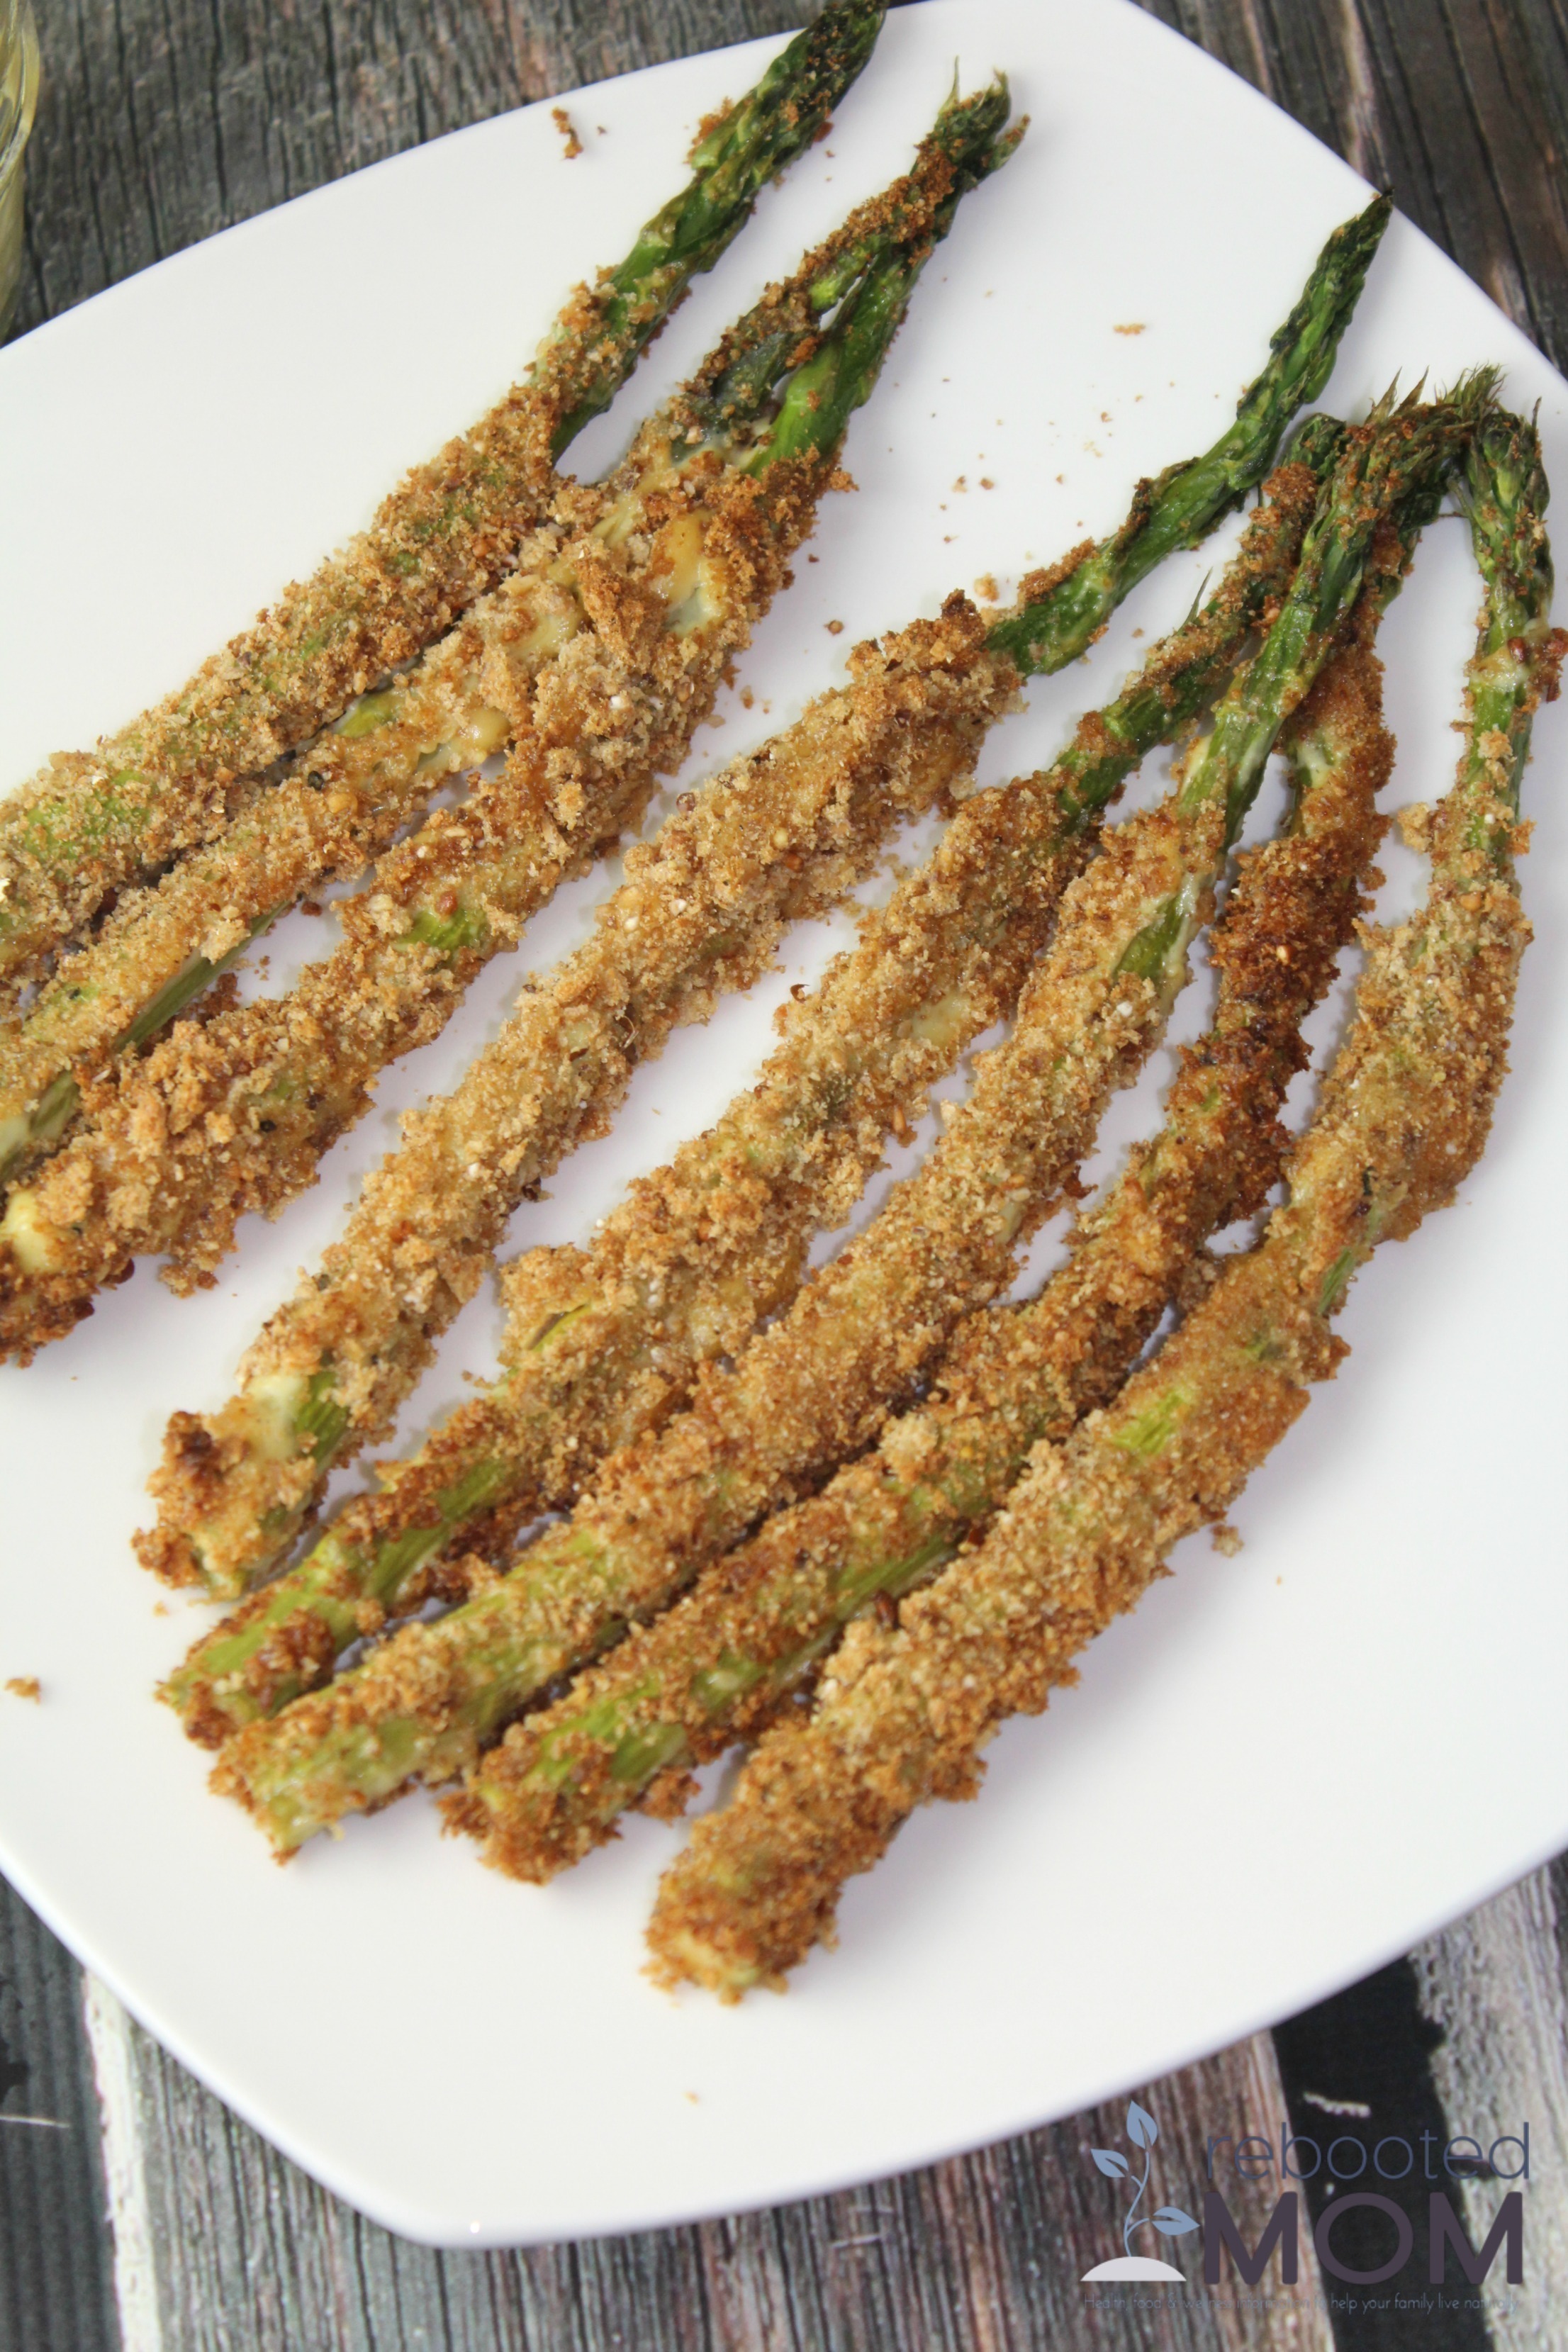 Panko roasted asparagus are fresh asparagus spears coasted in a mixture of grated parmesan and breadcrumbs and baked until they are crispy, golden brown.